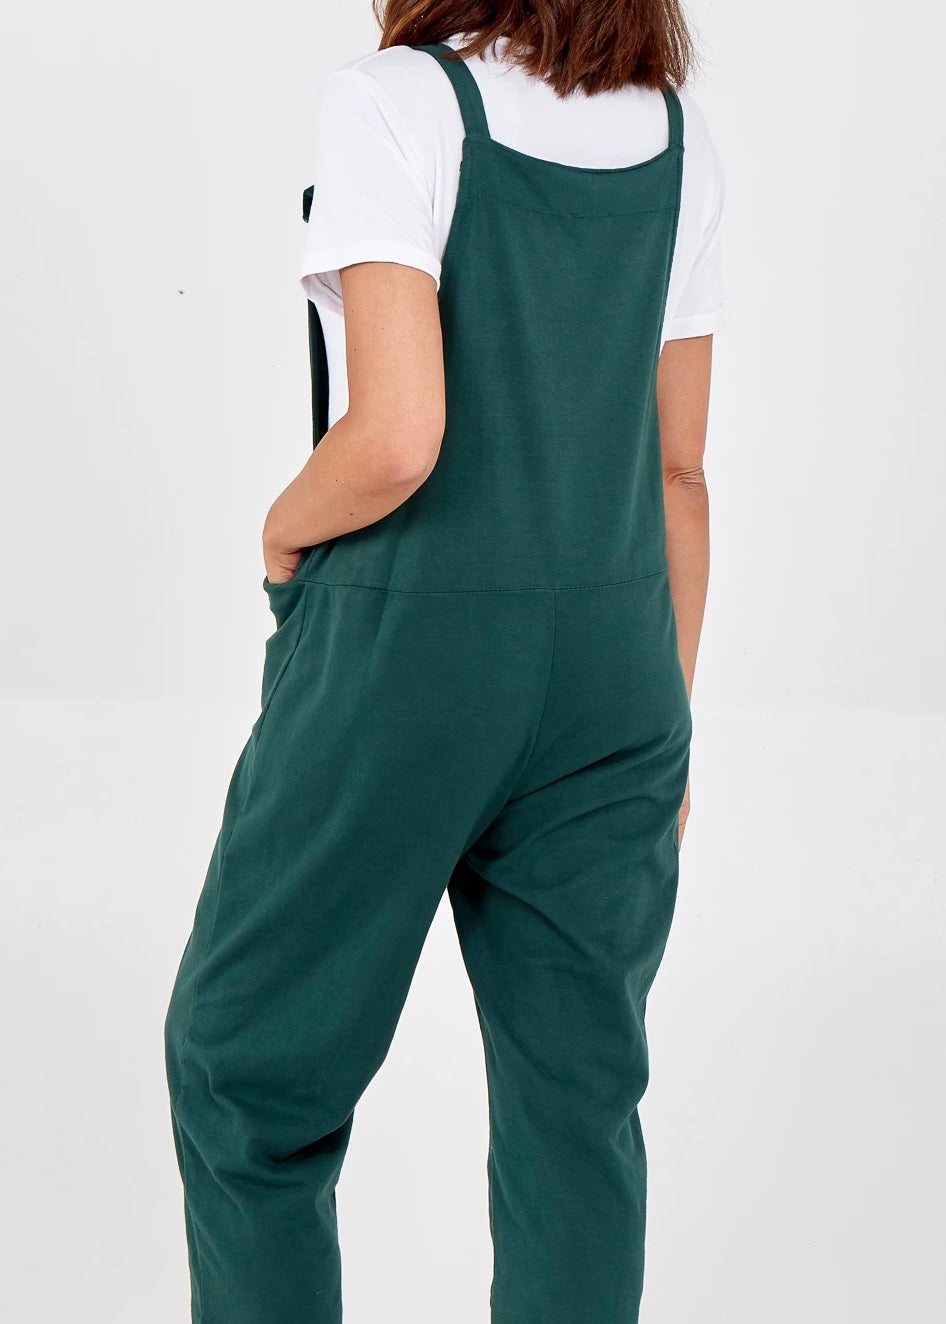 Plain jersey dungarees with tie straps showing the back in green